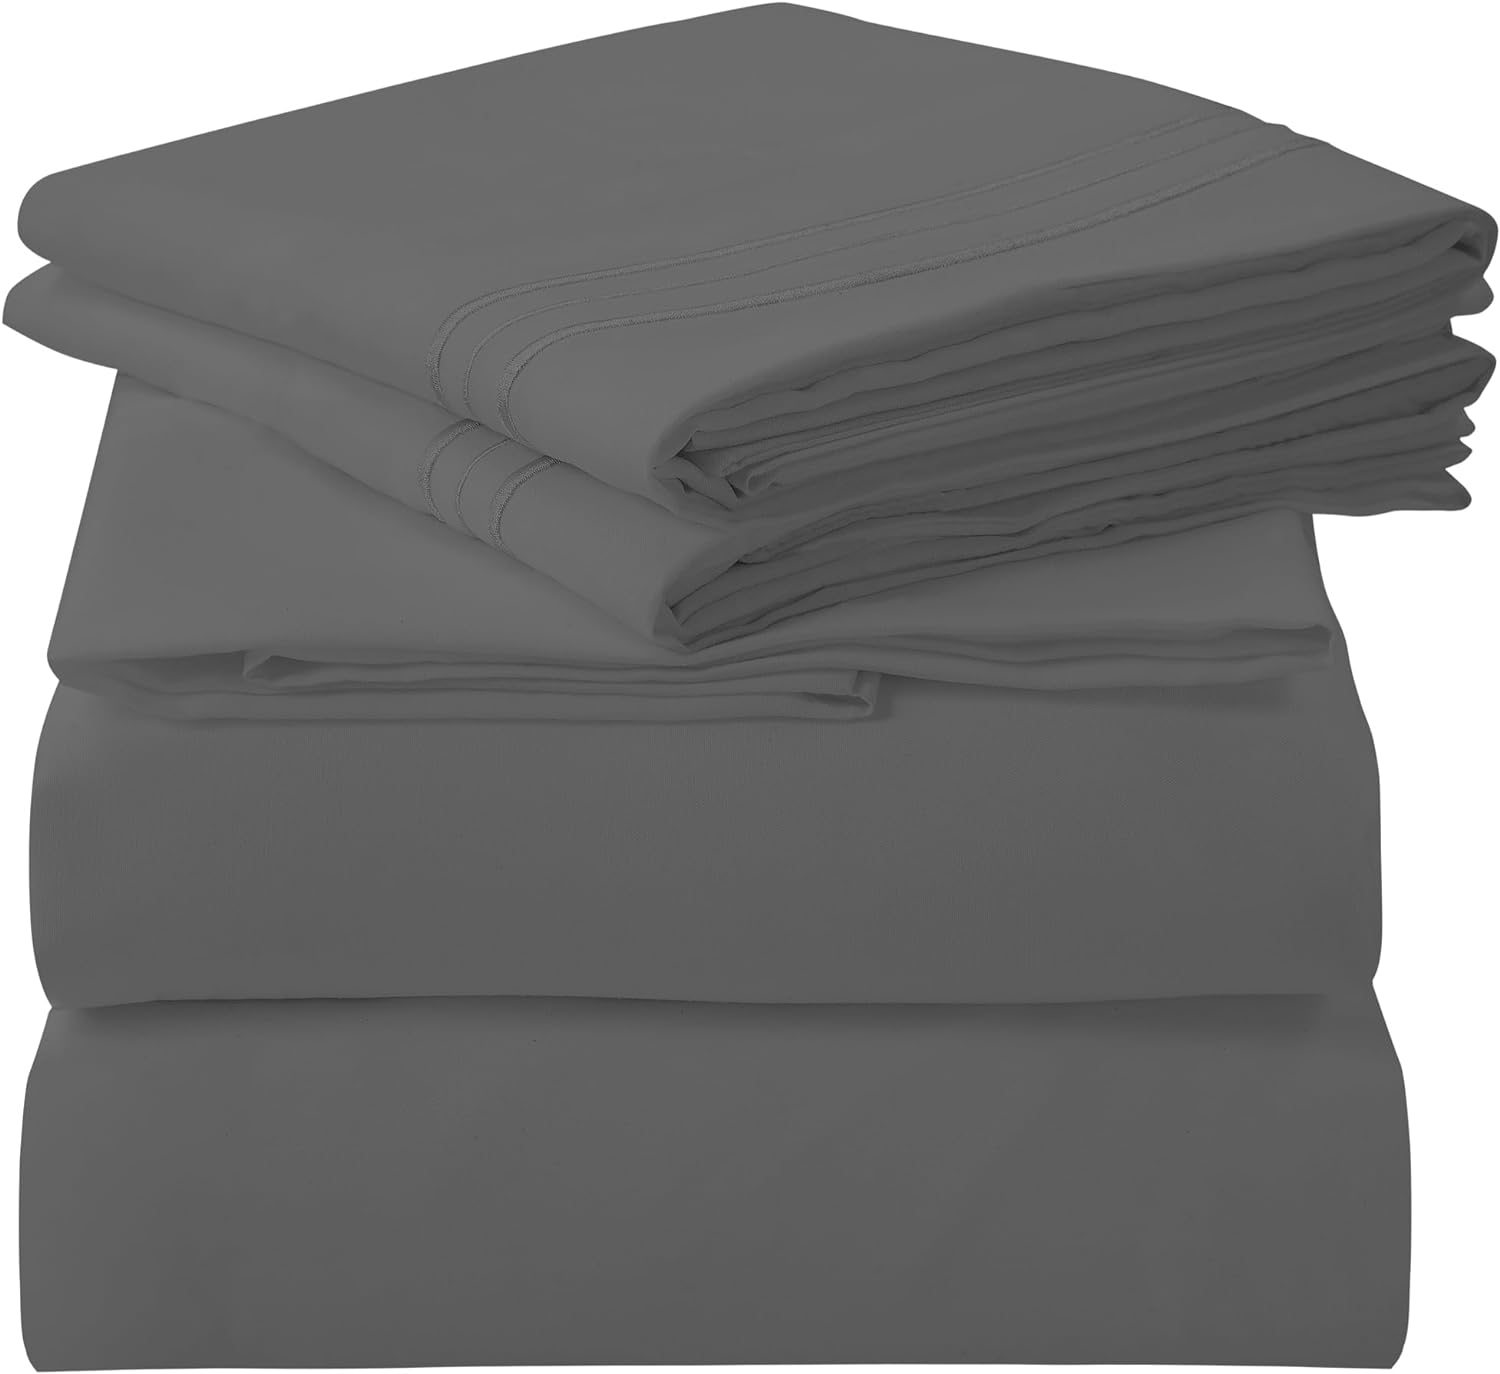 ROYALE LINENS - 4 Piece Full Bed Sheet - Soft Brushed Microfiber 1800 Bedding Set - 1 Fitted Sheet, 1 Flat Sheet, 2 Pillow Cases - Wrinkle & Fade Resistant Luxury Full Size Sheet Set (Full, Grey)